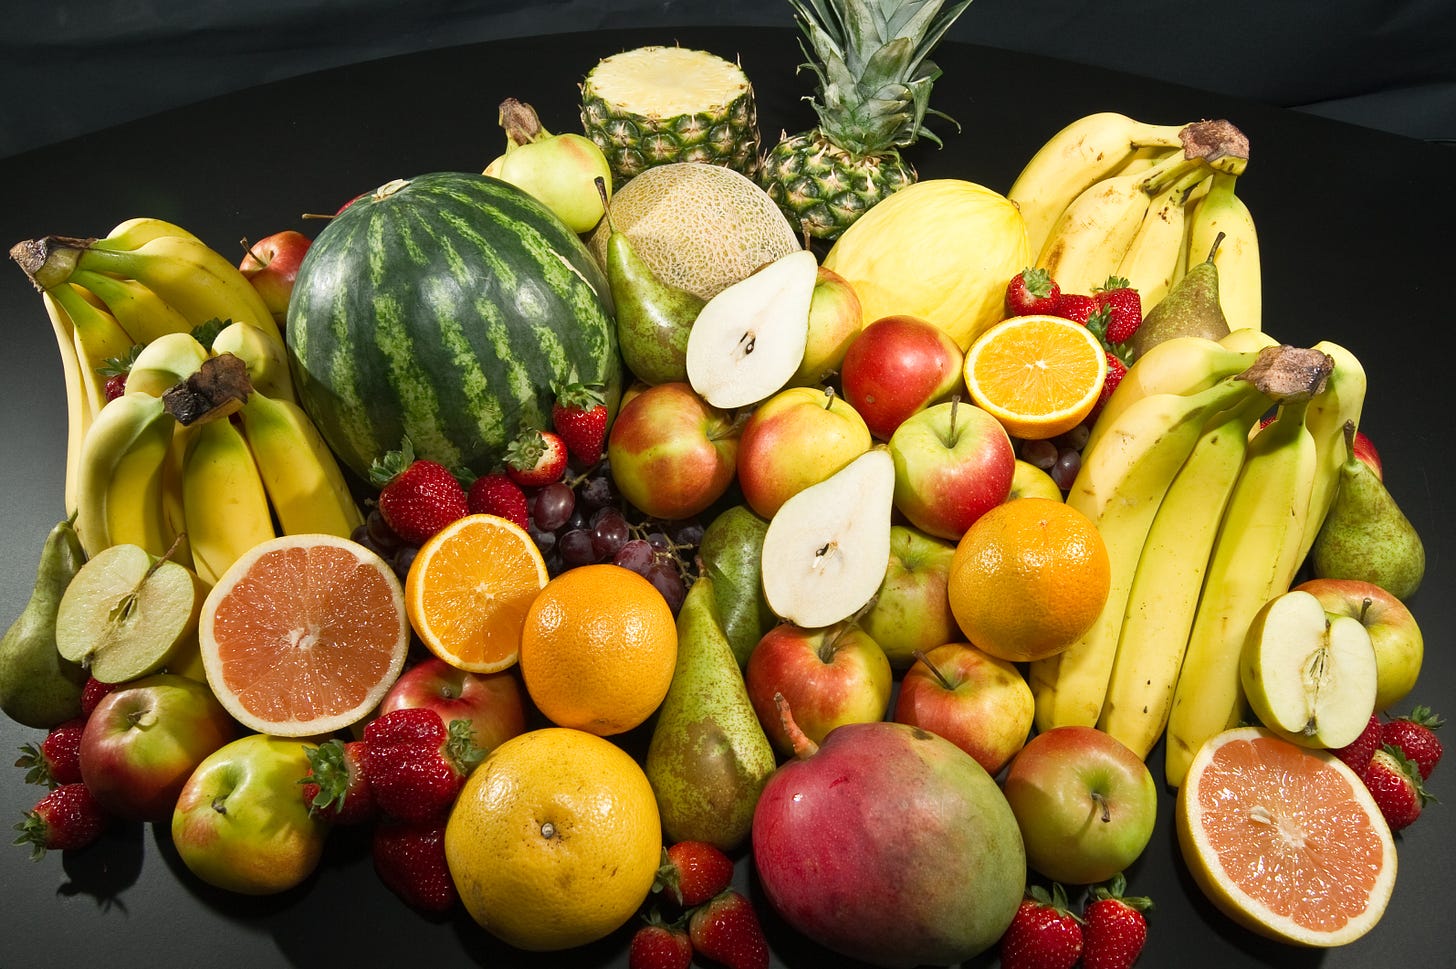 A collection of a lot of different kinds of fruit, including a watermellon, apples, bananas and strawberries